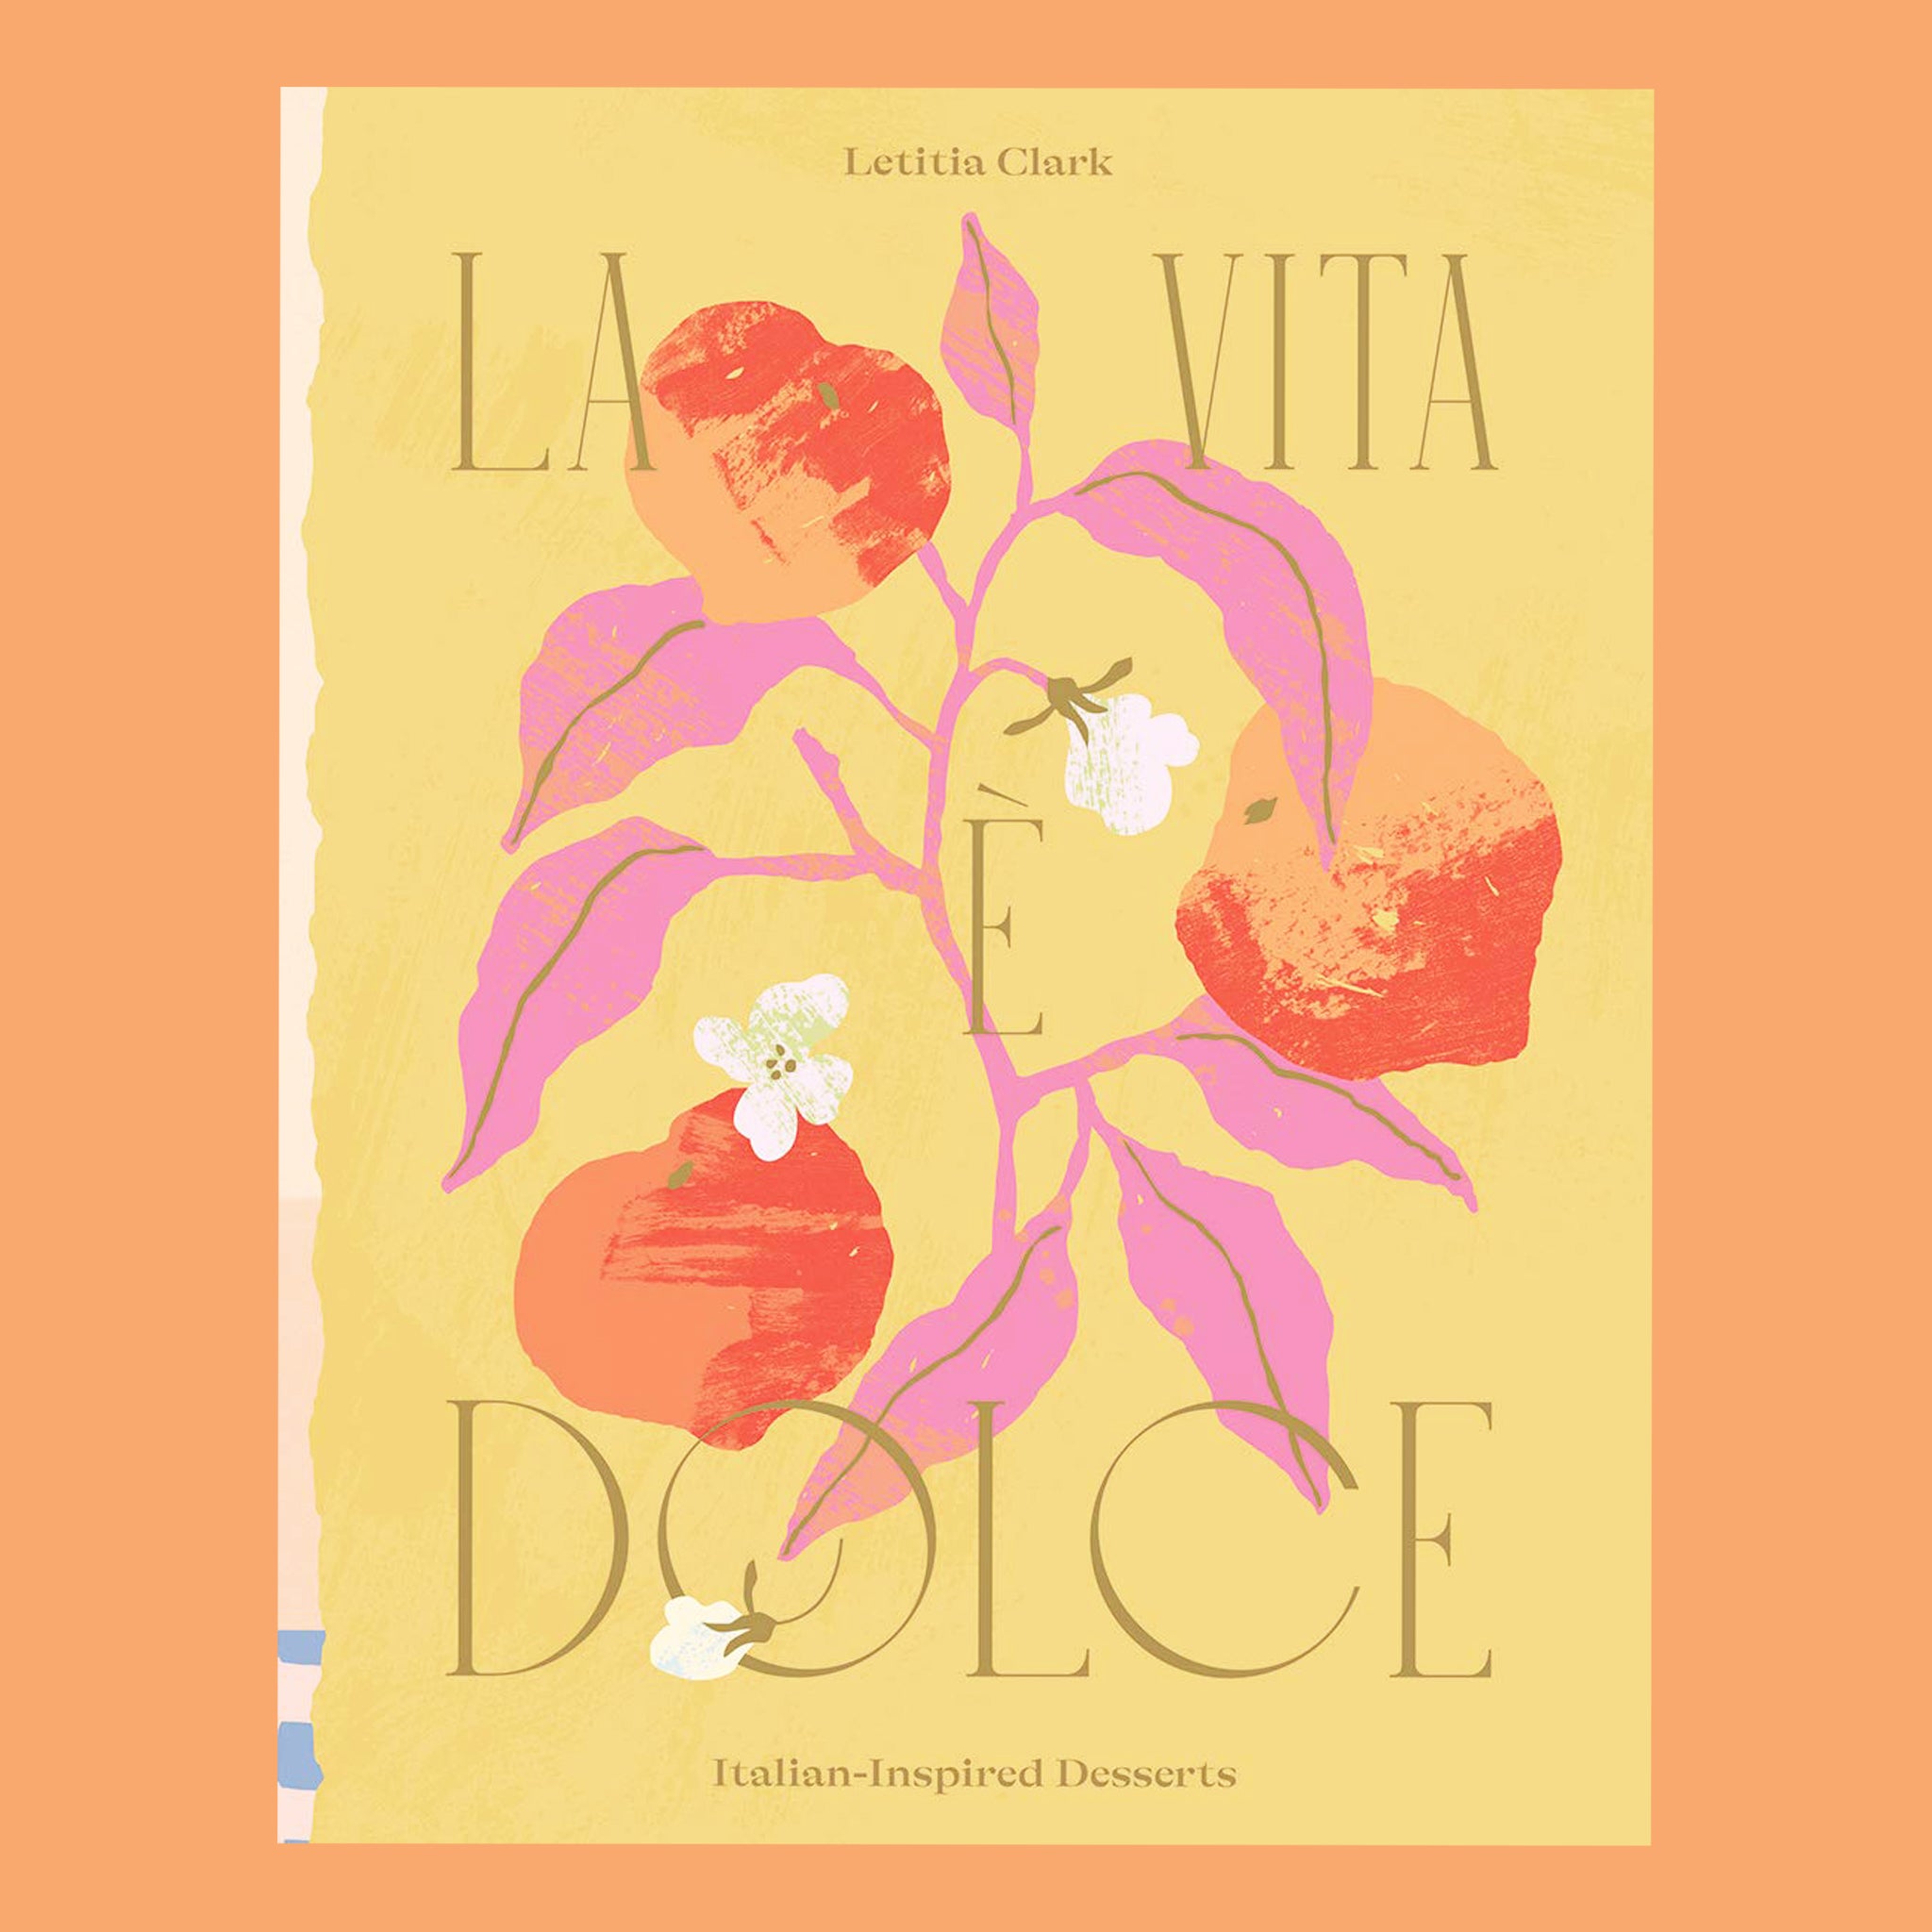 On an orange background is a yellow book cover with a fruit and foliage graphic with the title that reads, "La Vita E Dolce Italian Inspired Desserts". 